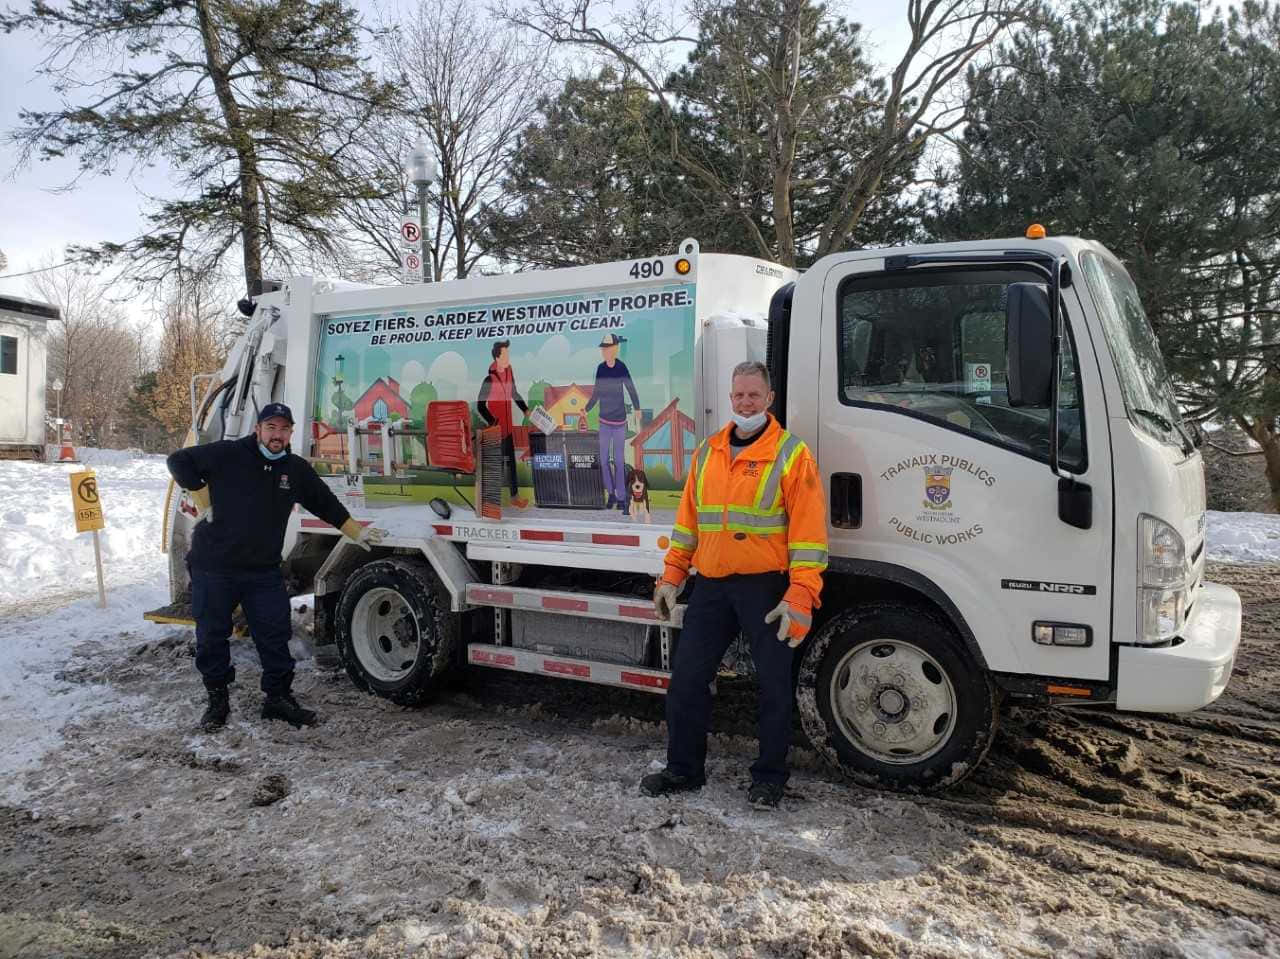 Two Men Standing Next To A Garbage Truck In The Snow